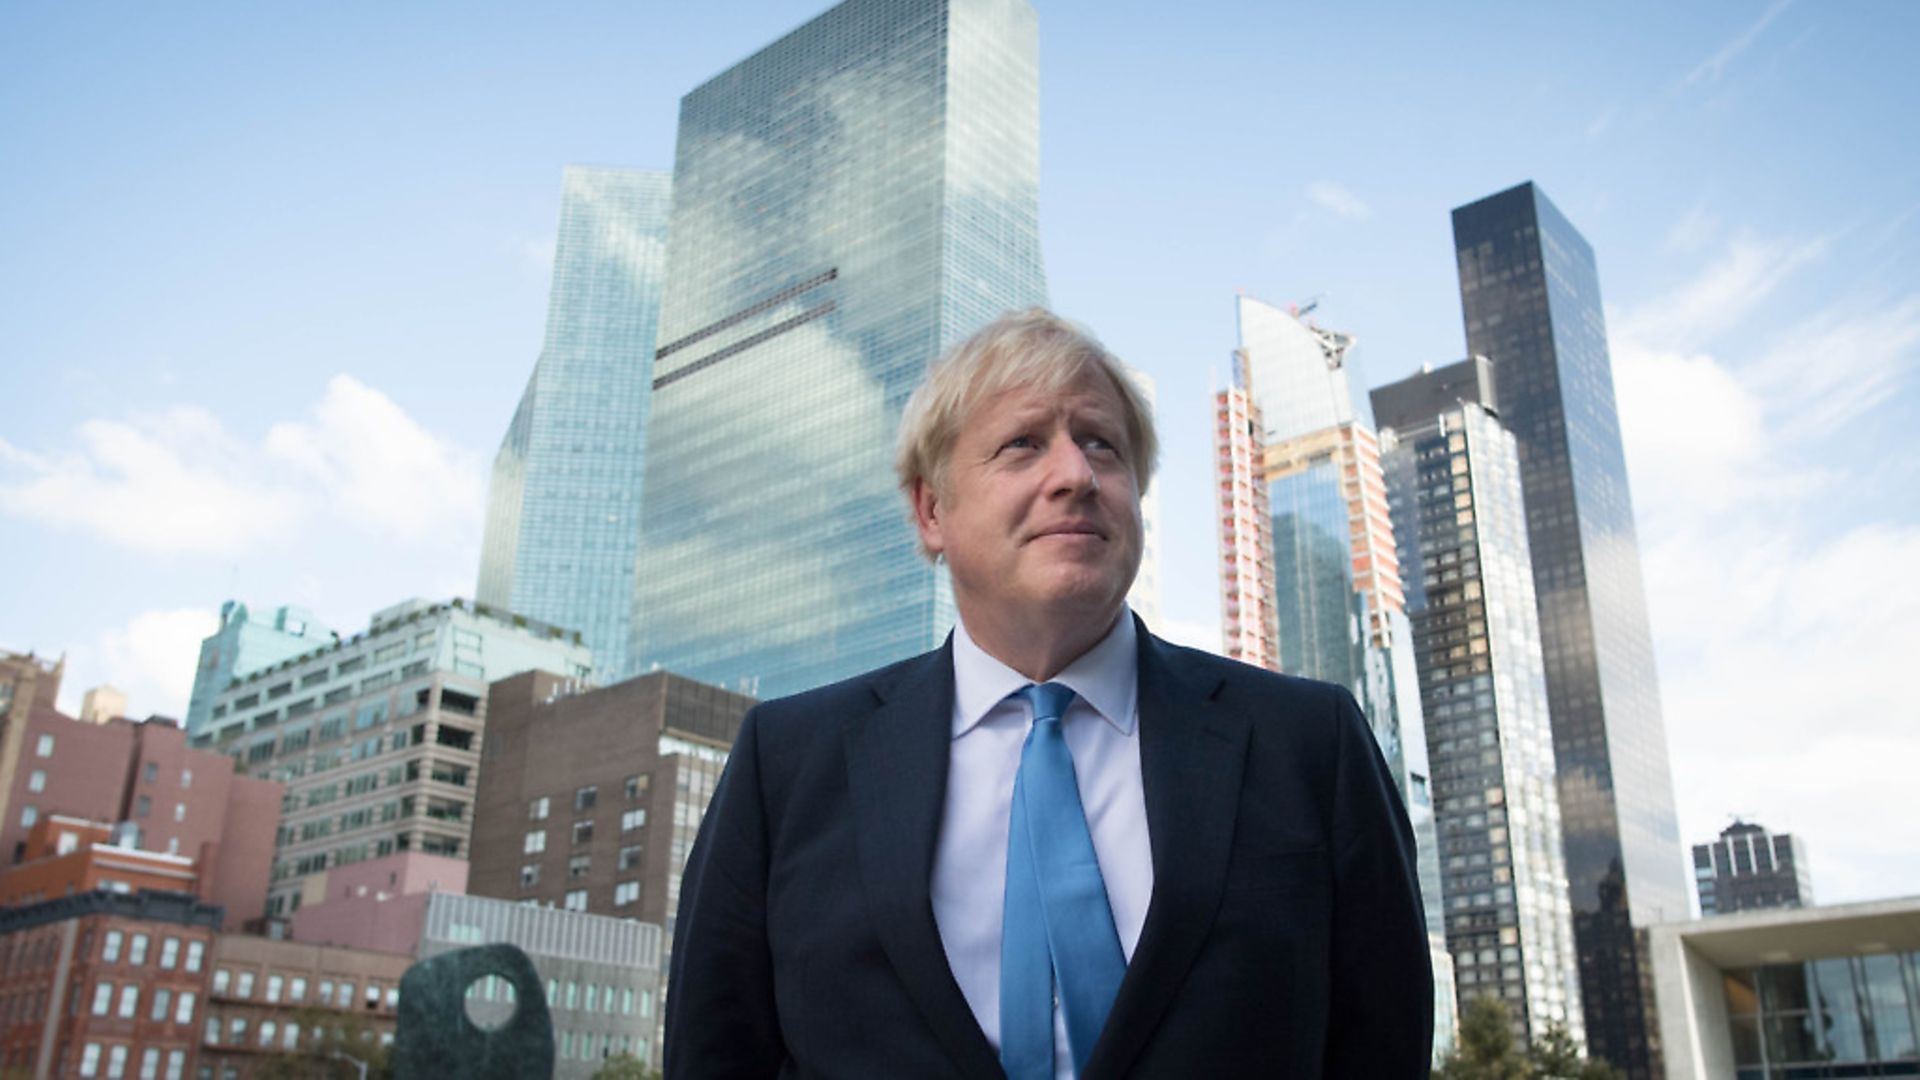 Boris Johnson is said to be the highest earner outside his MP salary. Photograph: Stefan Rousseau/PA. - Credit: PA Wire/PA Images